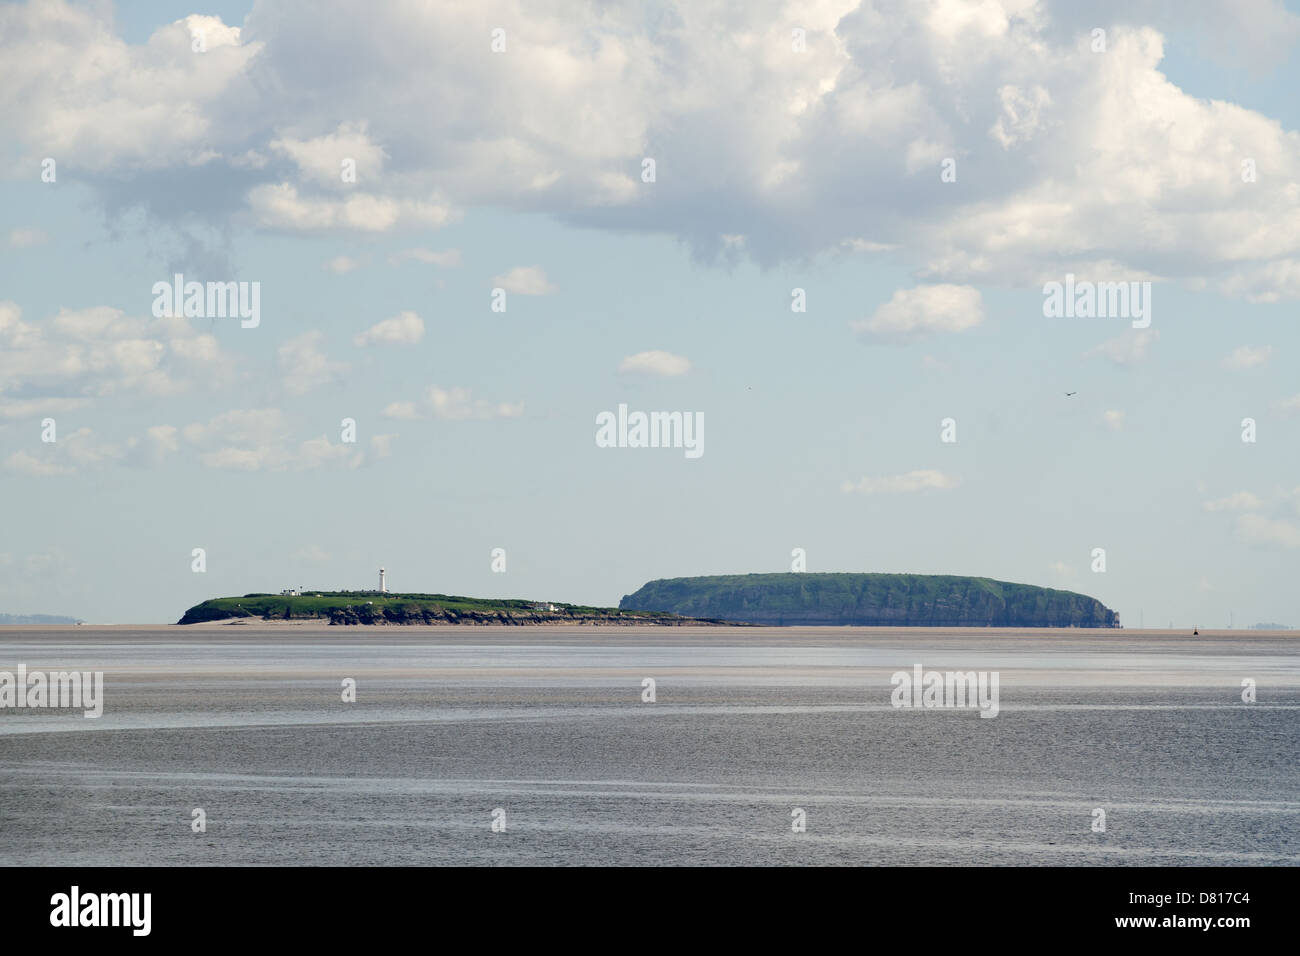 Islands Flat Holm (L, Wales) and Steep Holm (R, England), as seen from the Cardiff Bay barrage. Stock Photo